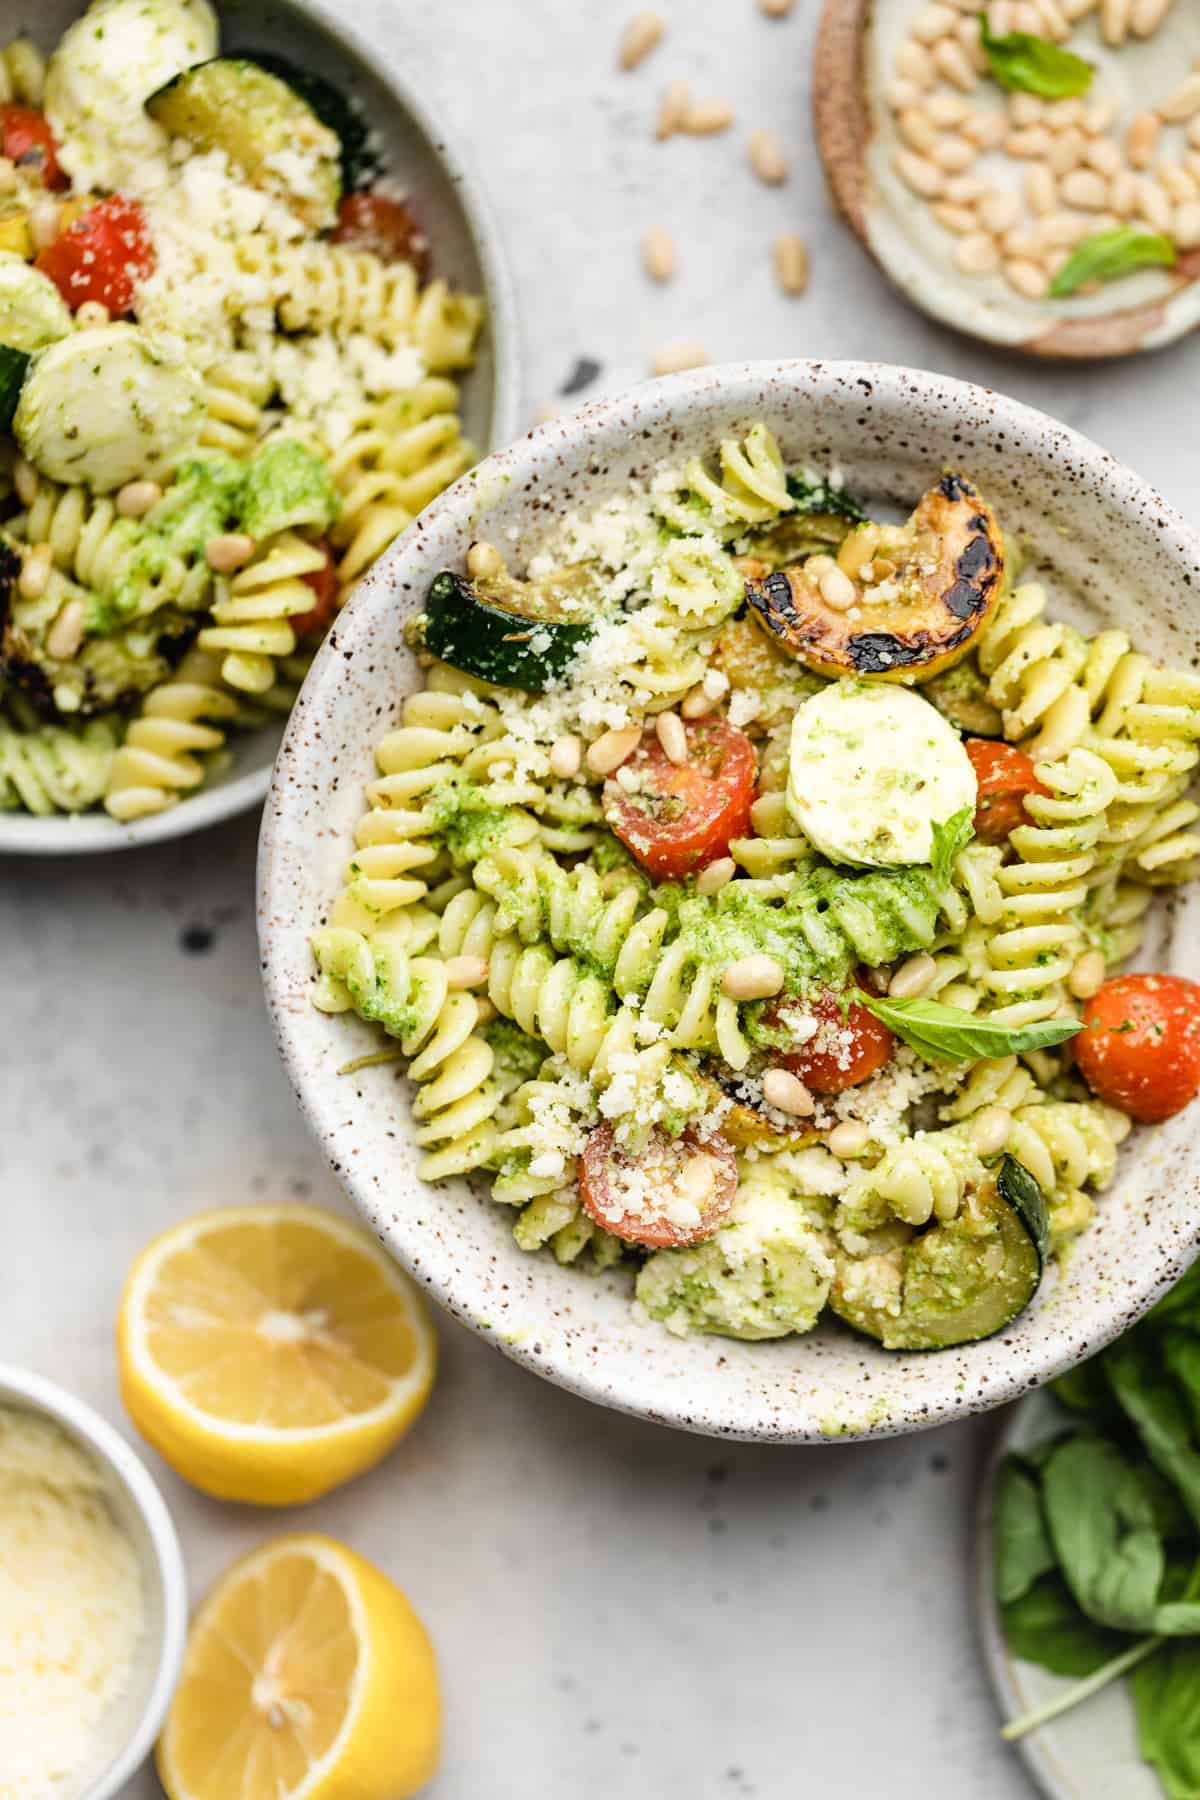 Healthy Pesto Salad Work Lunch without Pasta